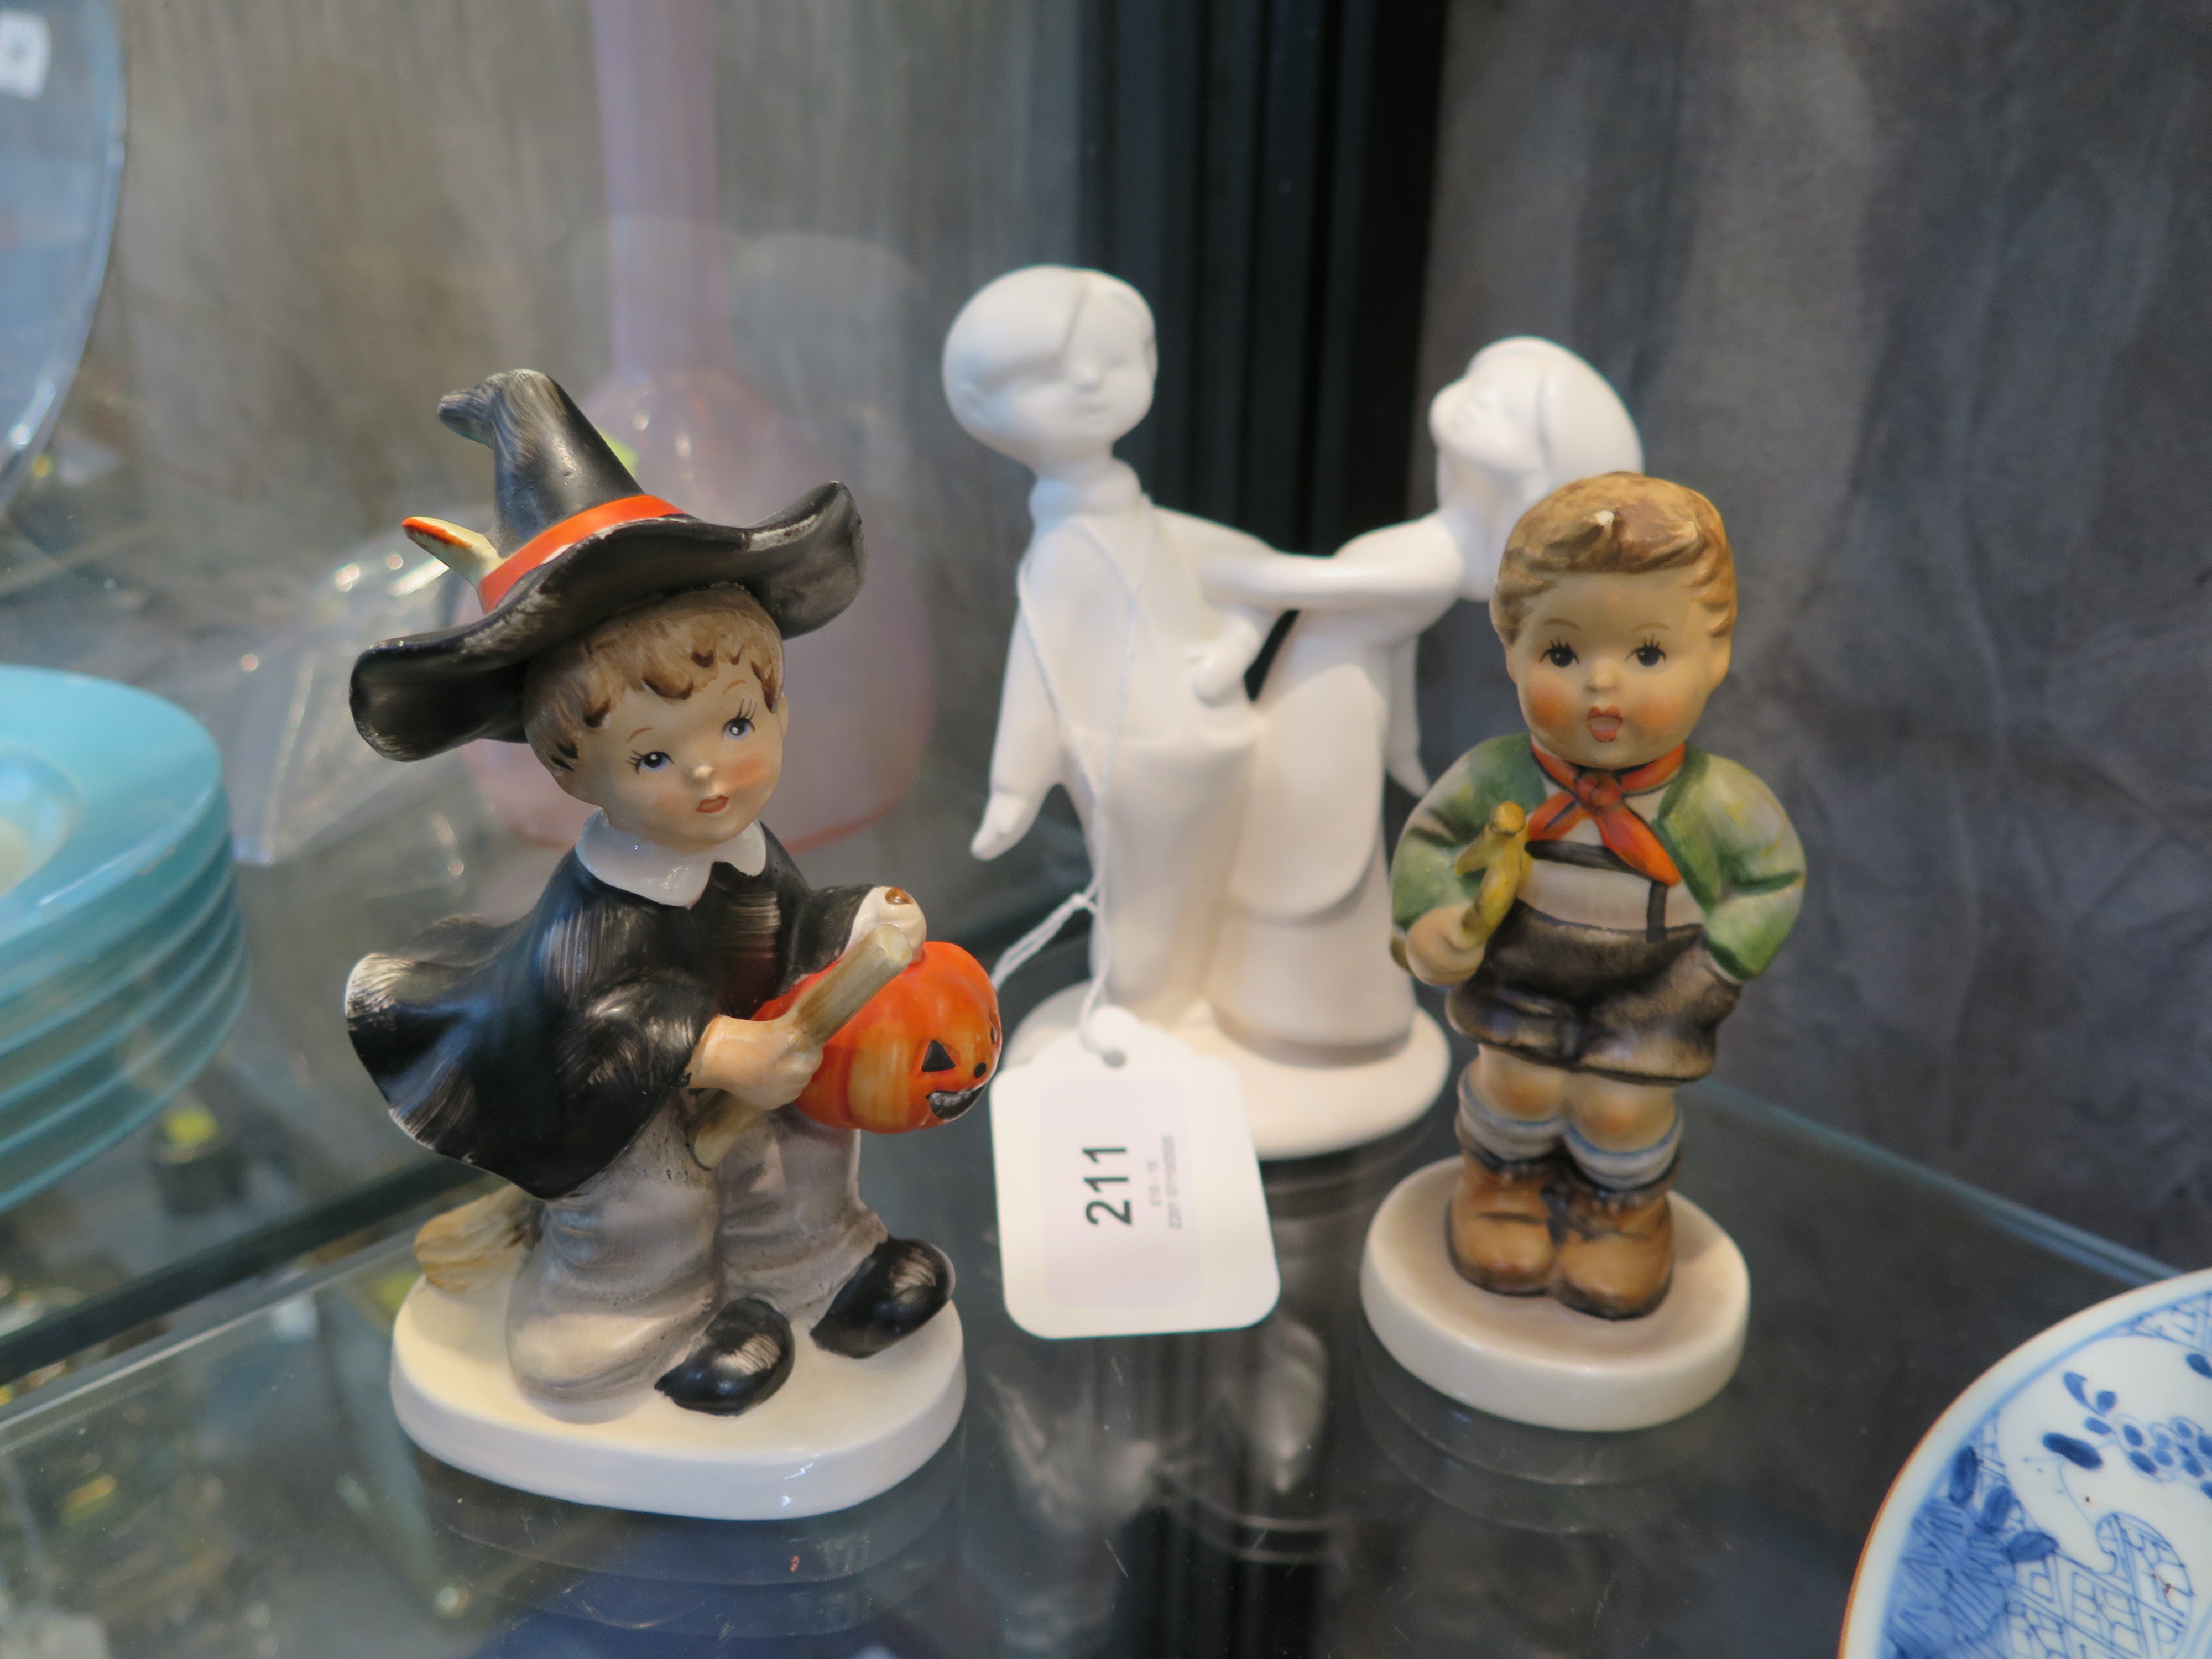 A Halloween figure of a child in witches costume, seated in on a broom holding a pumpkin, together